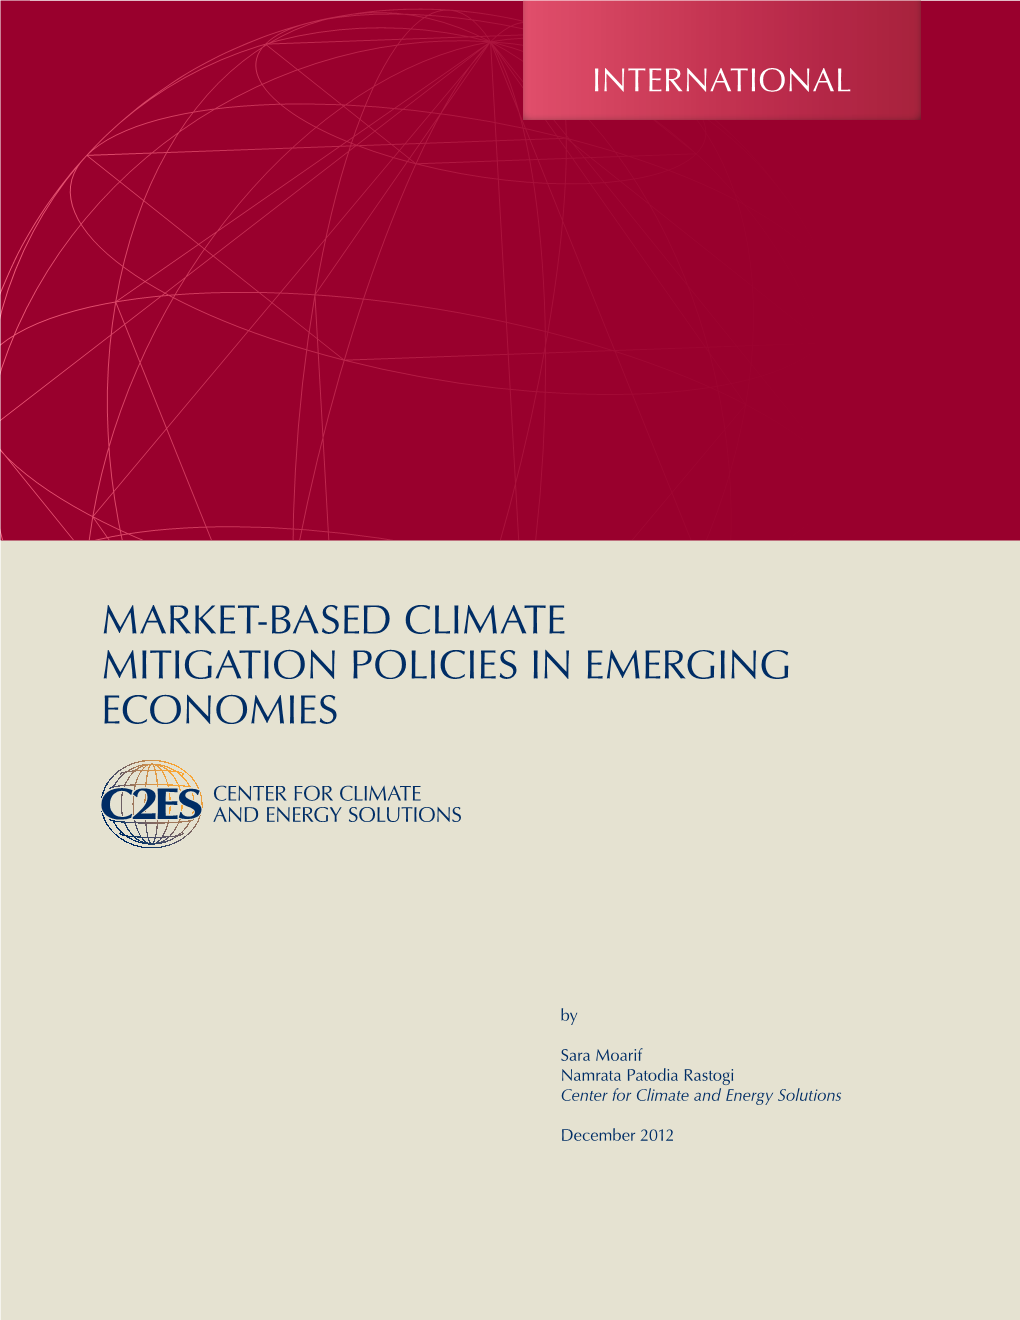 Market-Based Climate Mitigation Policies in Emerging Economies